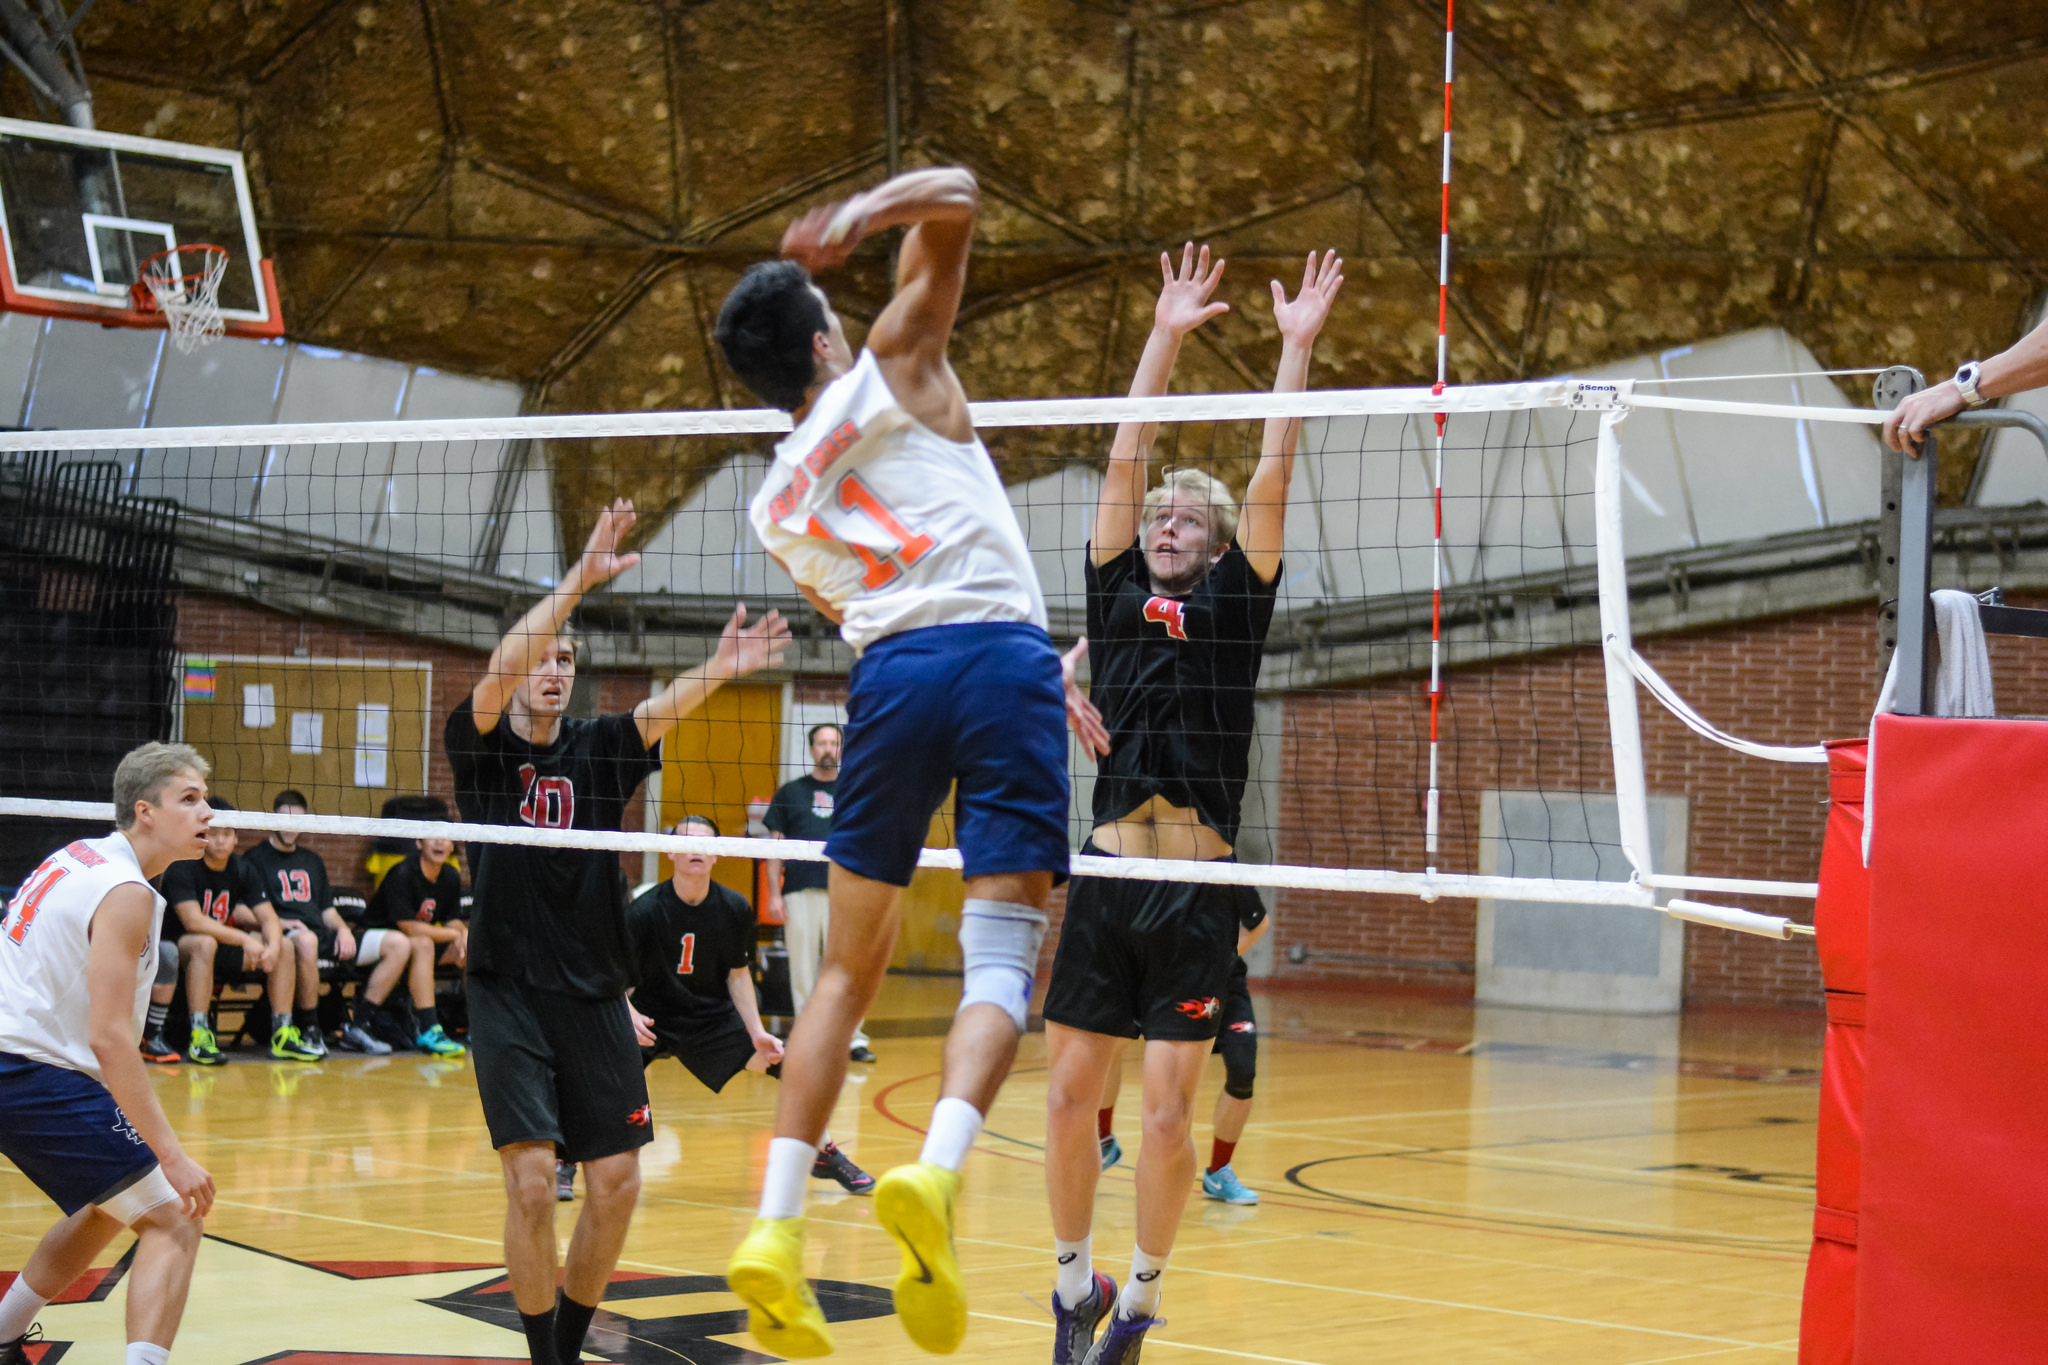 During the third set of the March 11, 2015 match against Orange Coast College at The Dome, Sean Keyes (4) goes to block a spike. (Seth Jones/The Telescope)